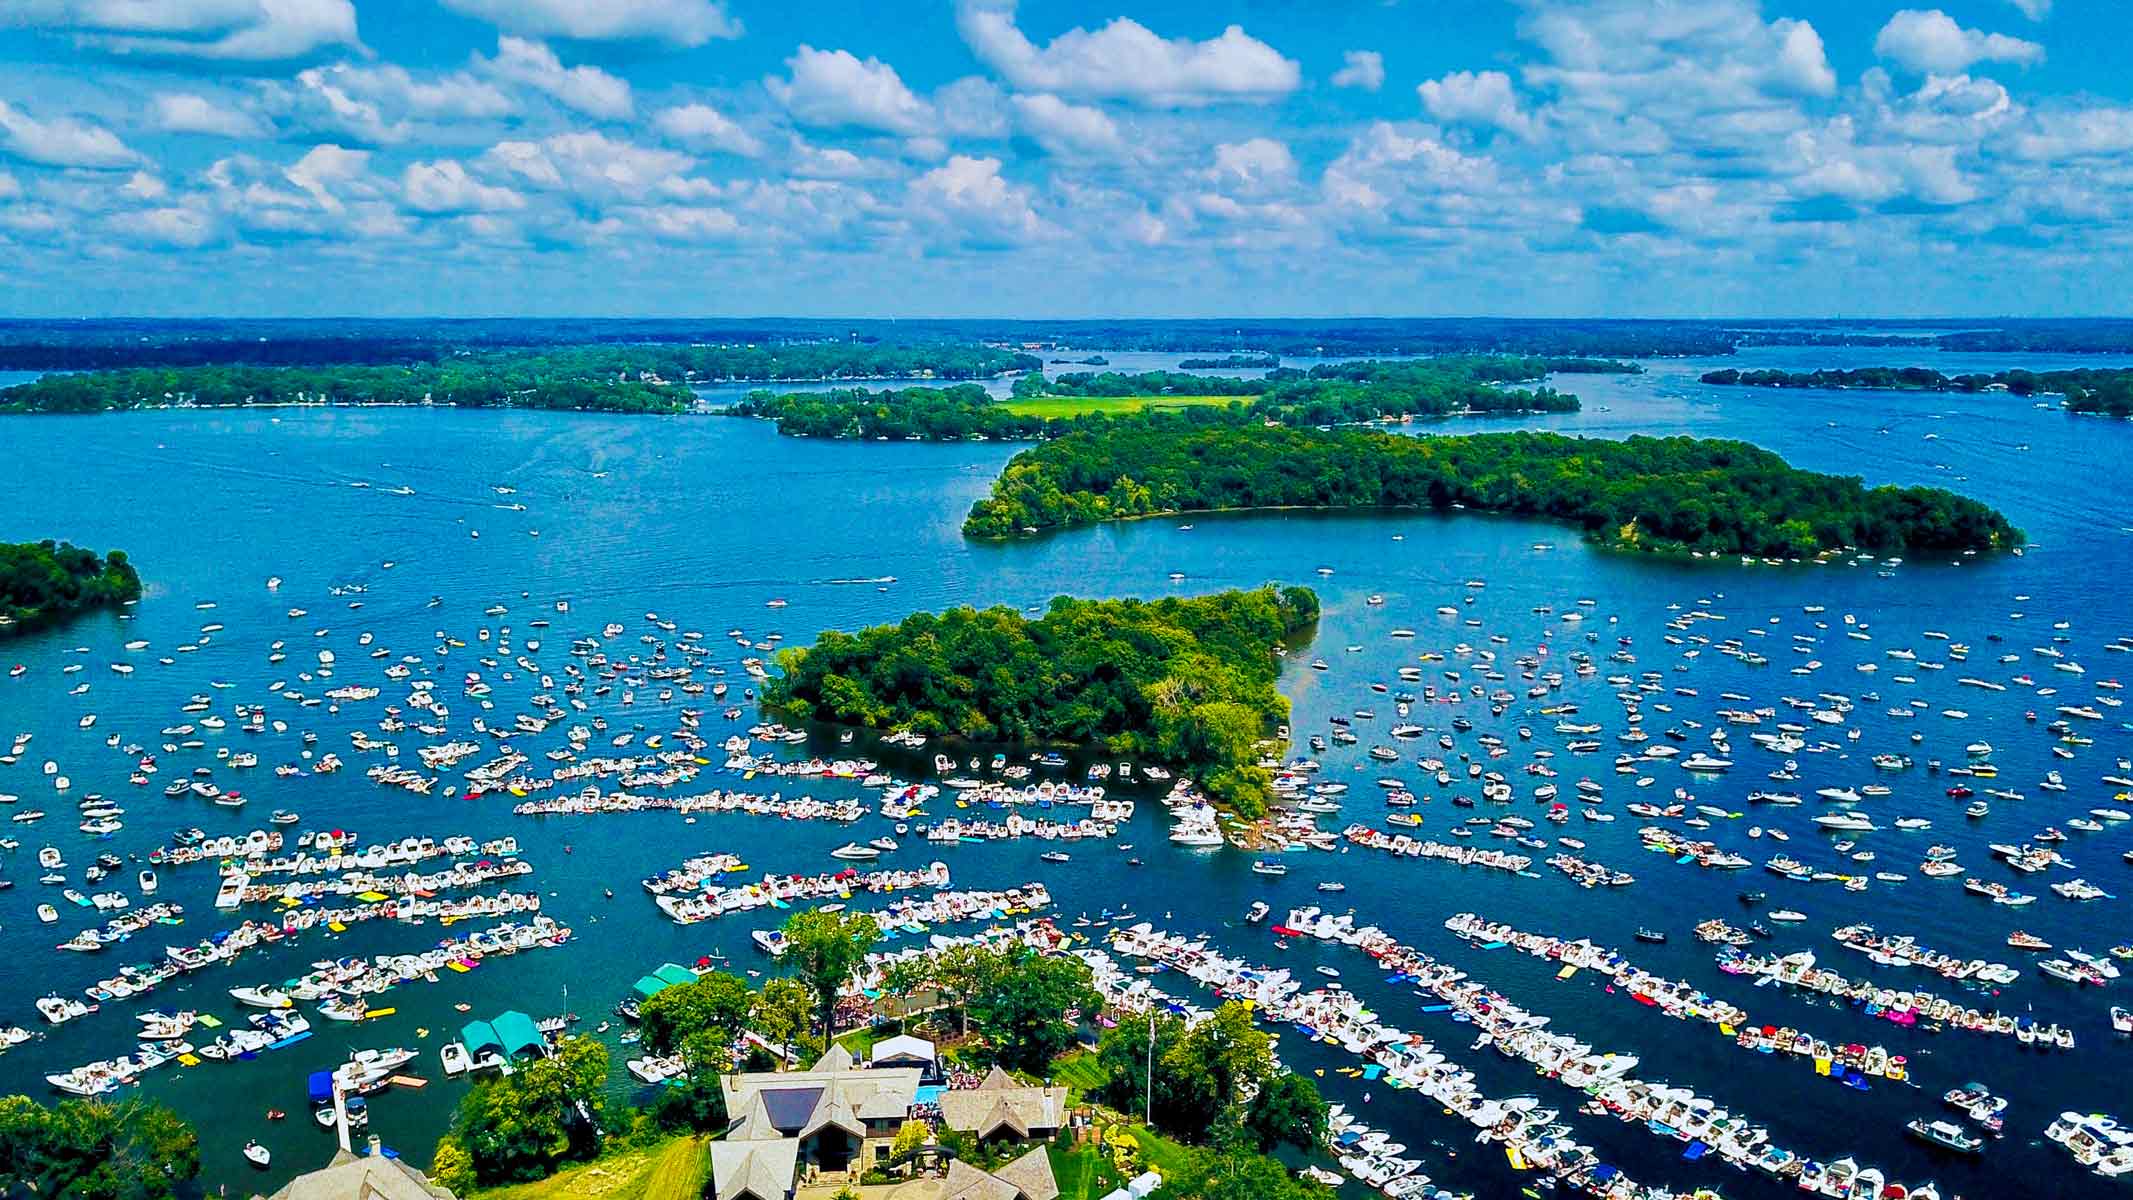 12 Awesome Destinations to Take Your Pontoon Boat in the U.S.